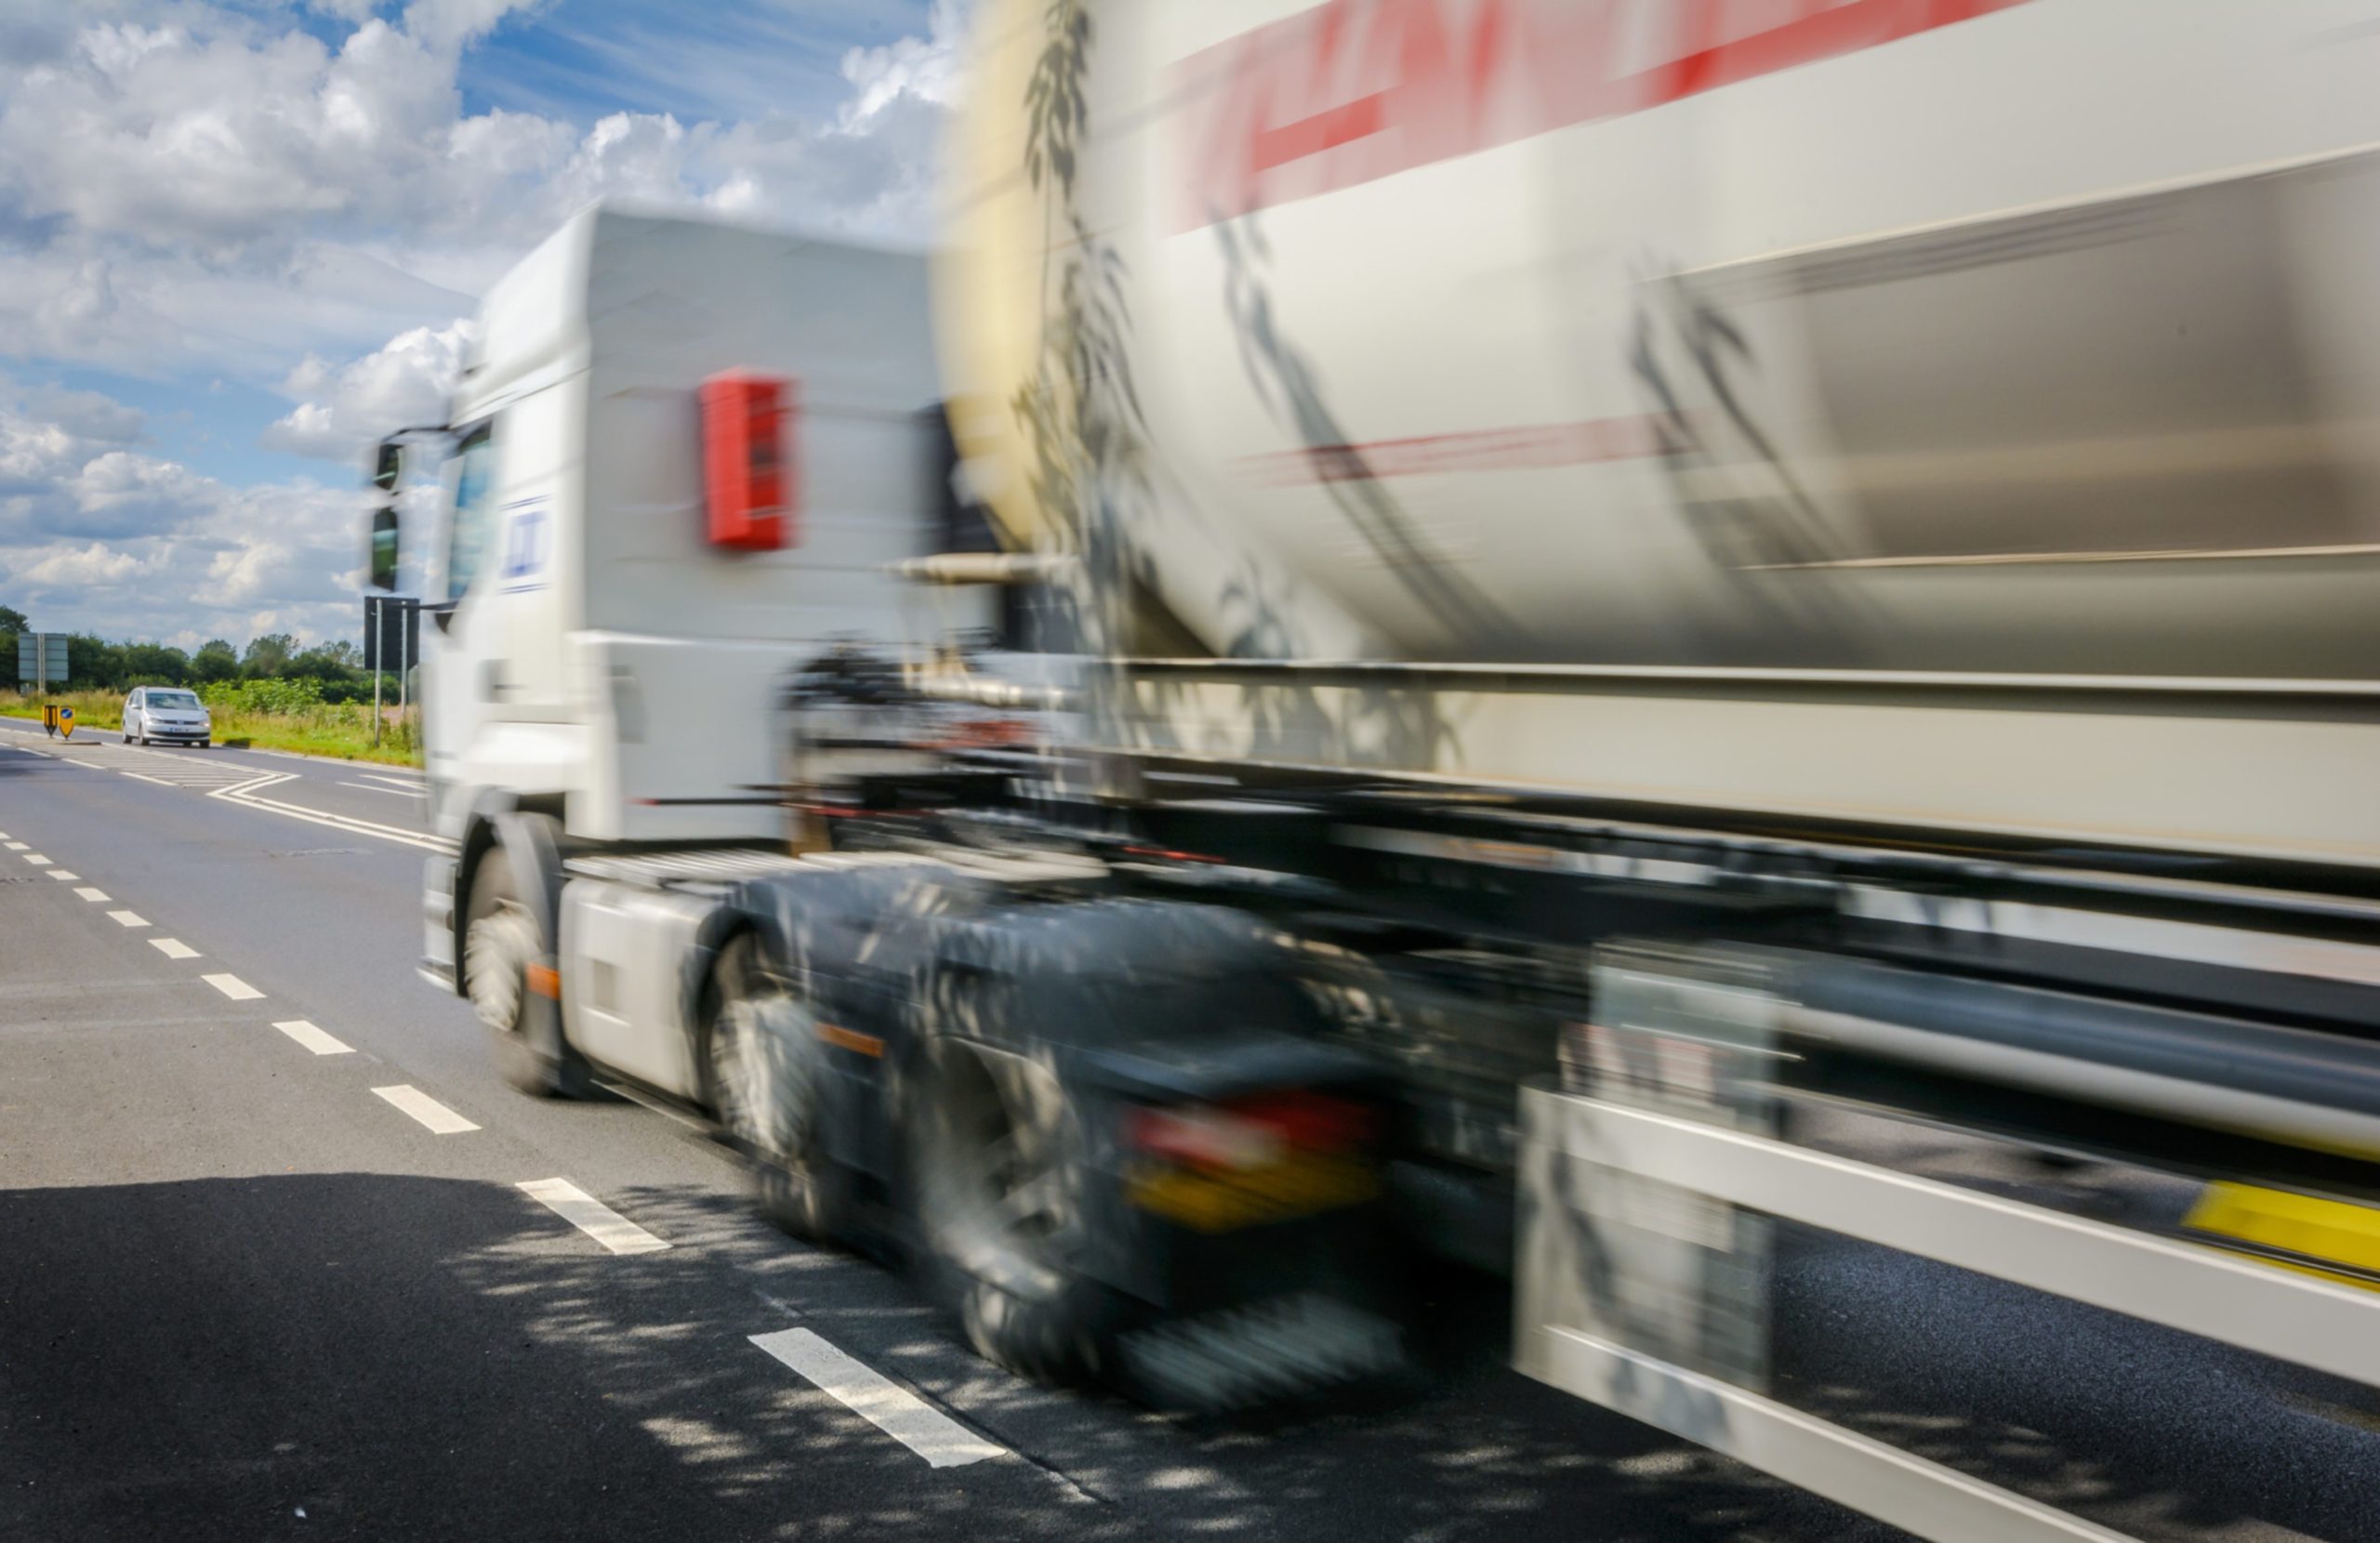 The haulage industry supports thousands of jobs across the UK.